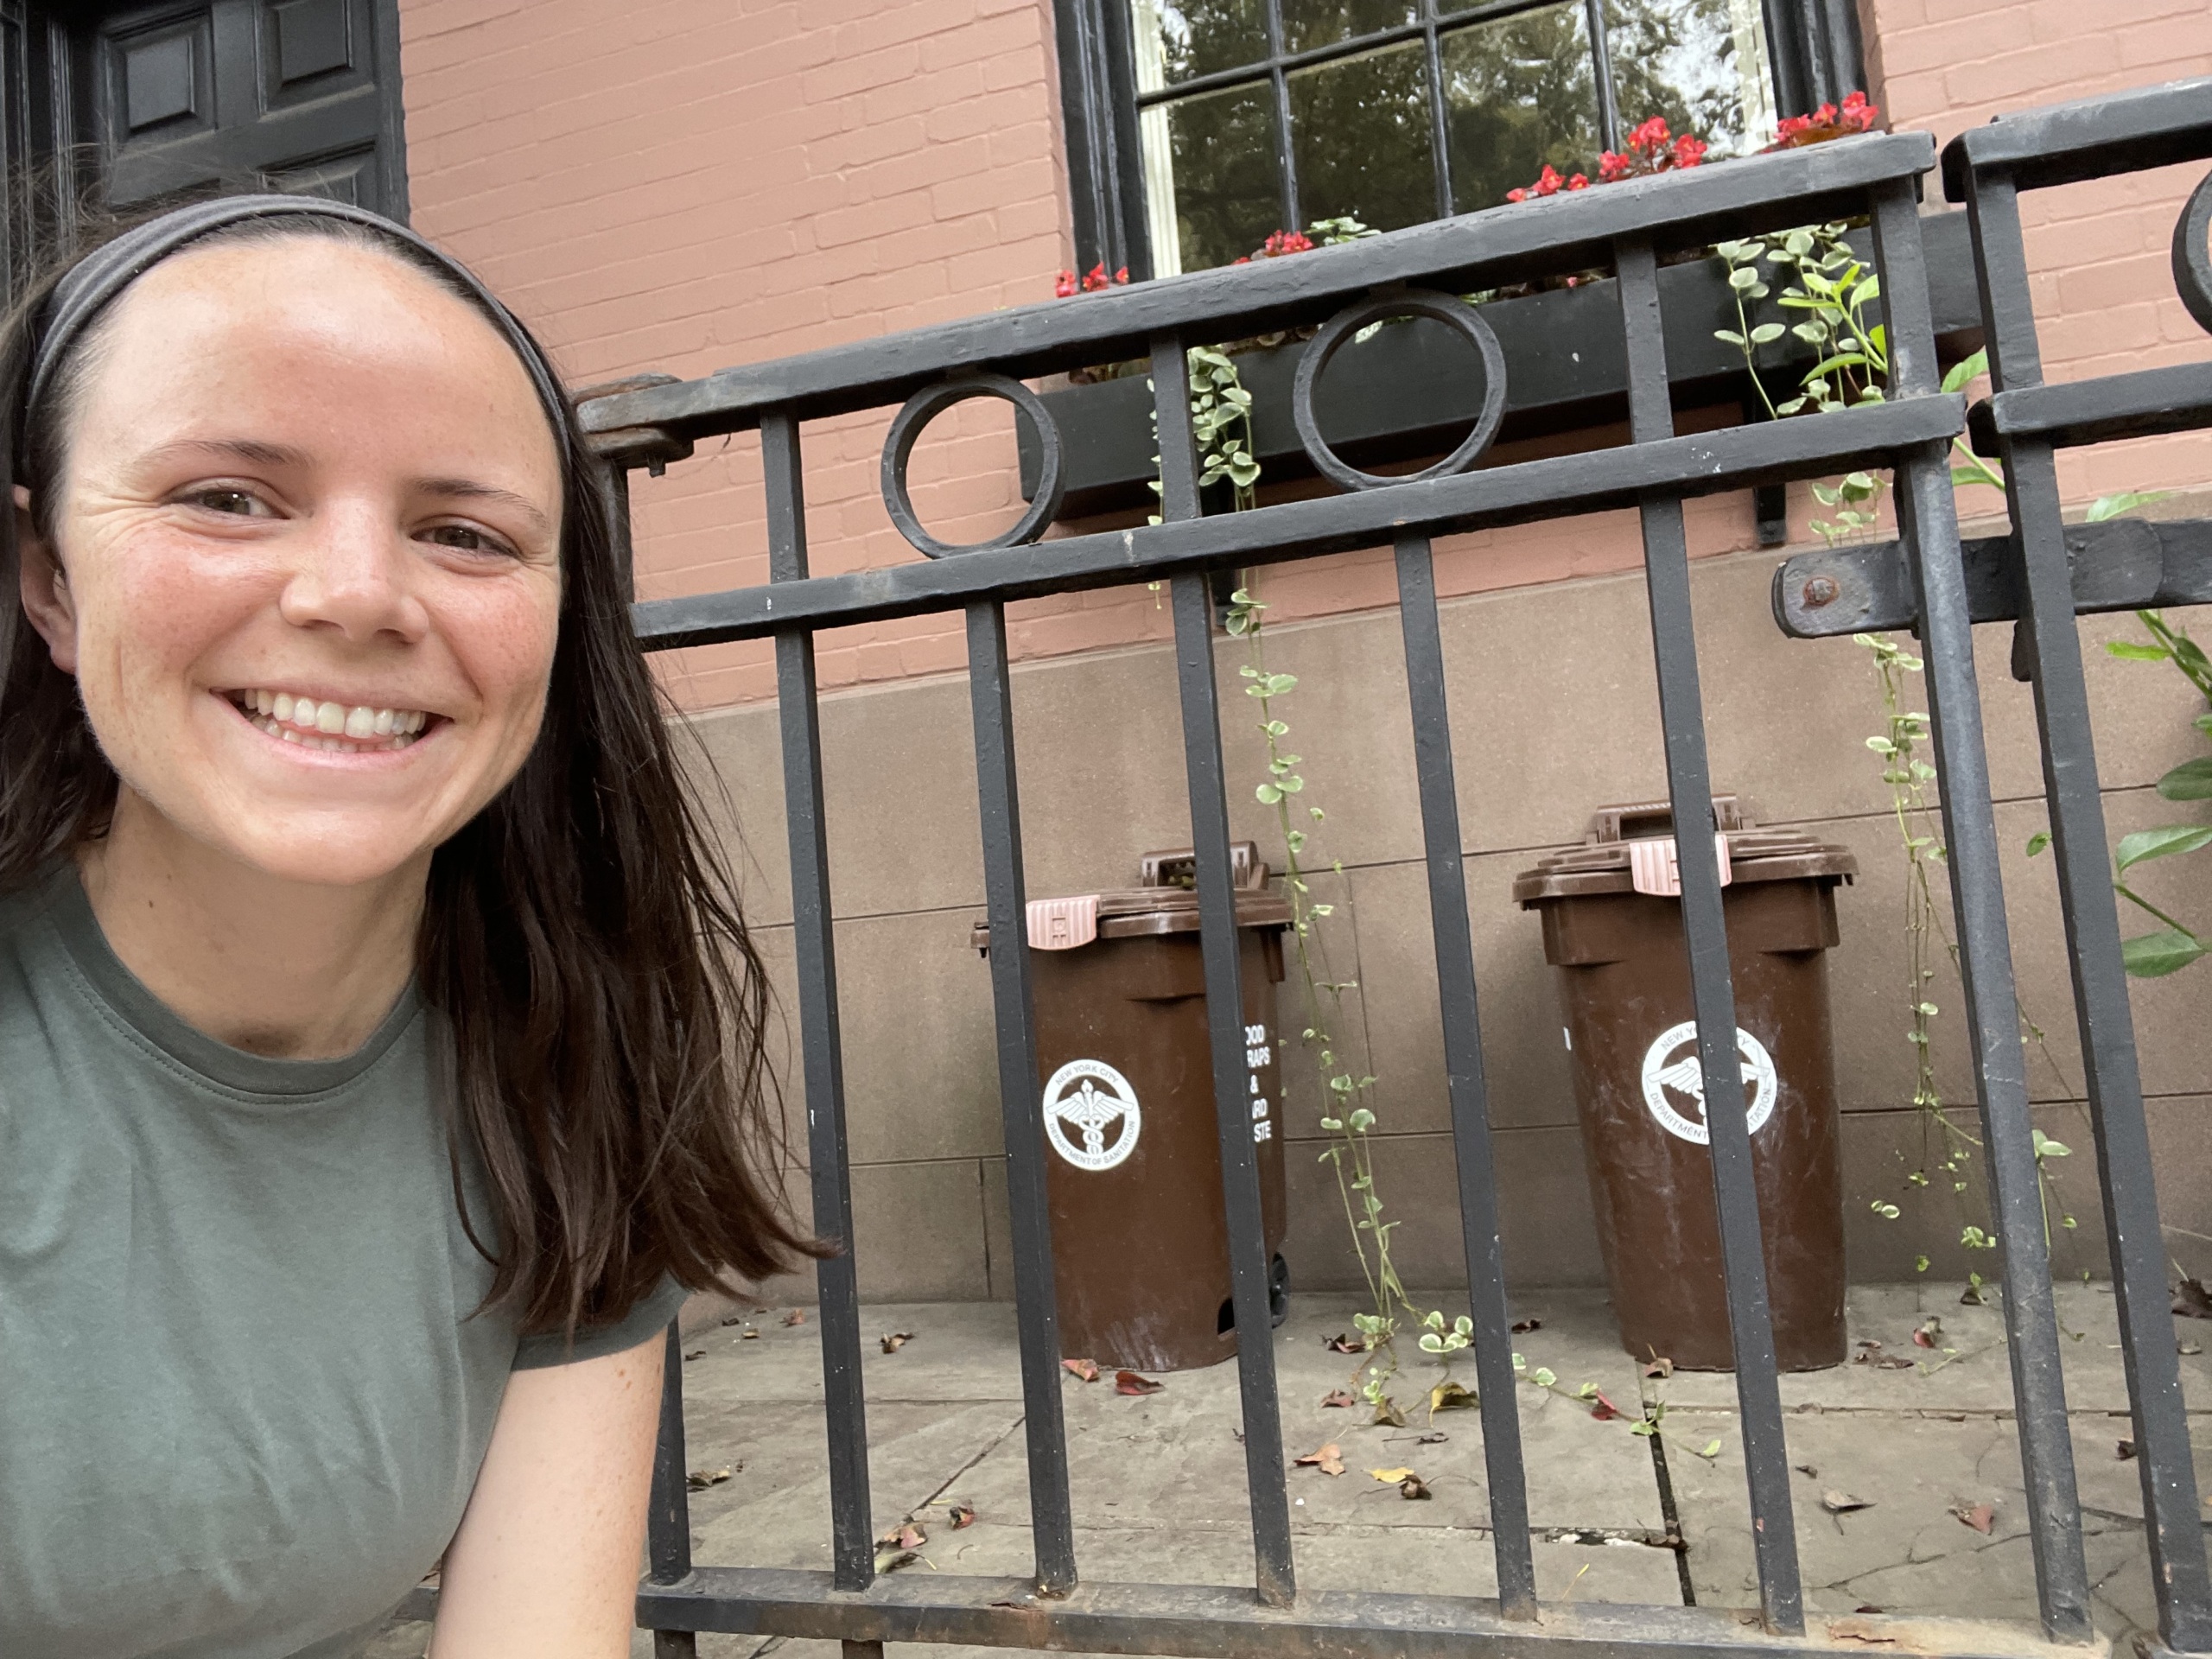 Danielle Melgar, Food & Agriculture Advocate, poses with organic waste collection bins in Brooklyn Heights